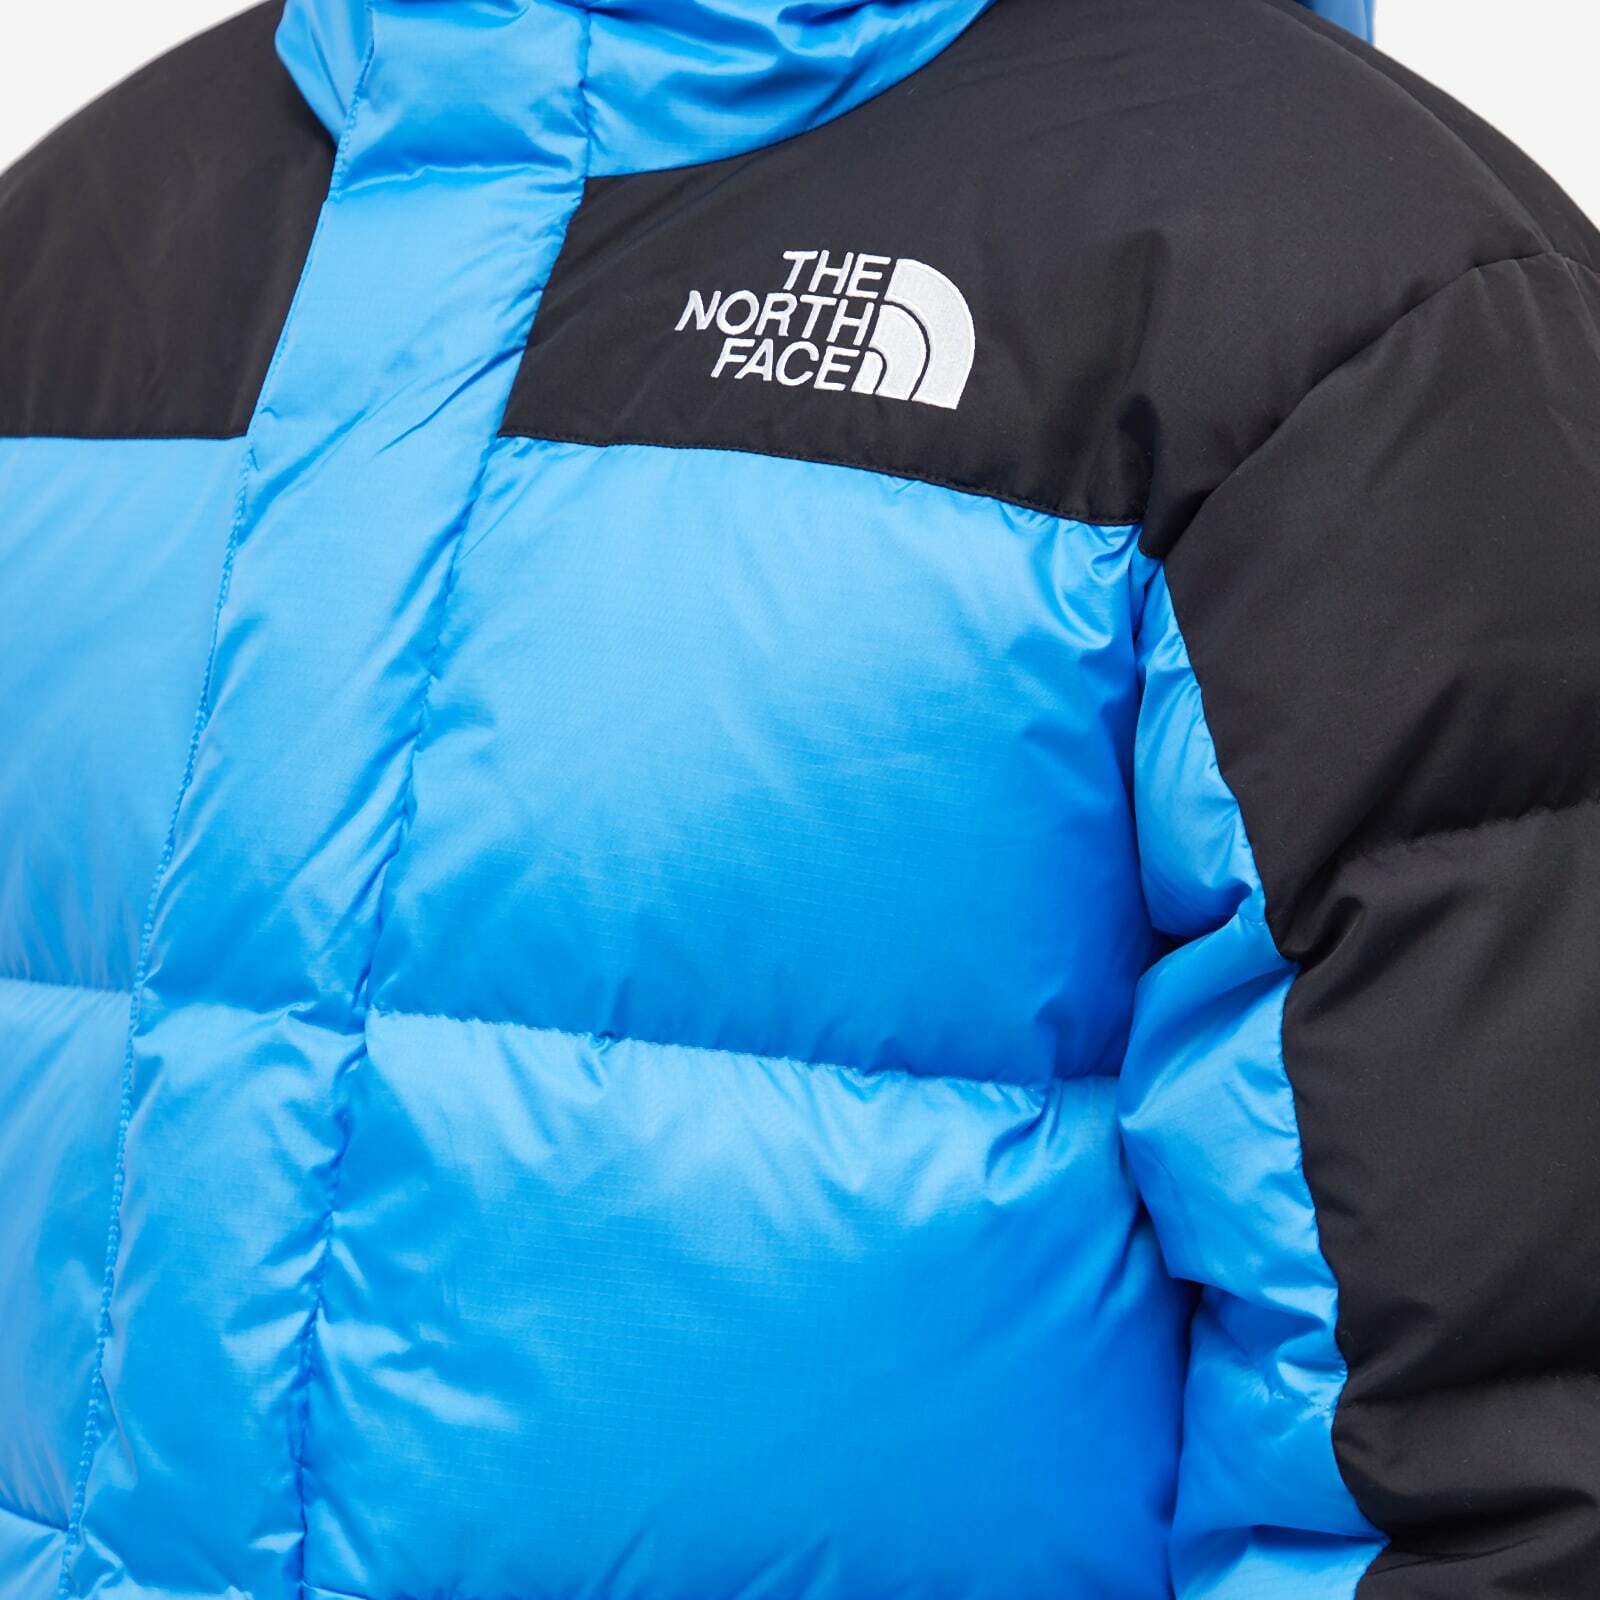 The North Face Men's Himalayan Down Parka Jacket in Super Sonic Blue ...